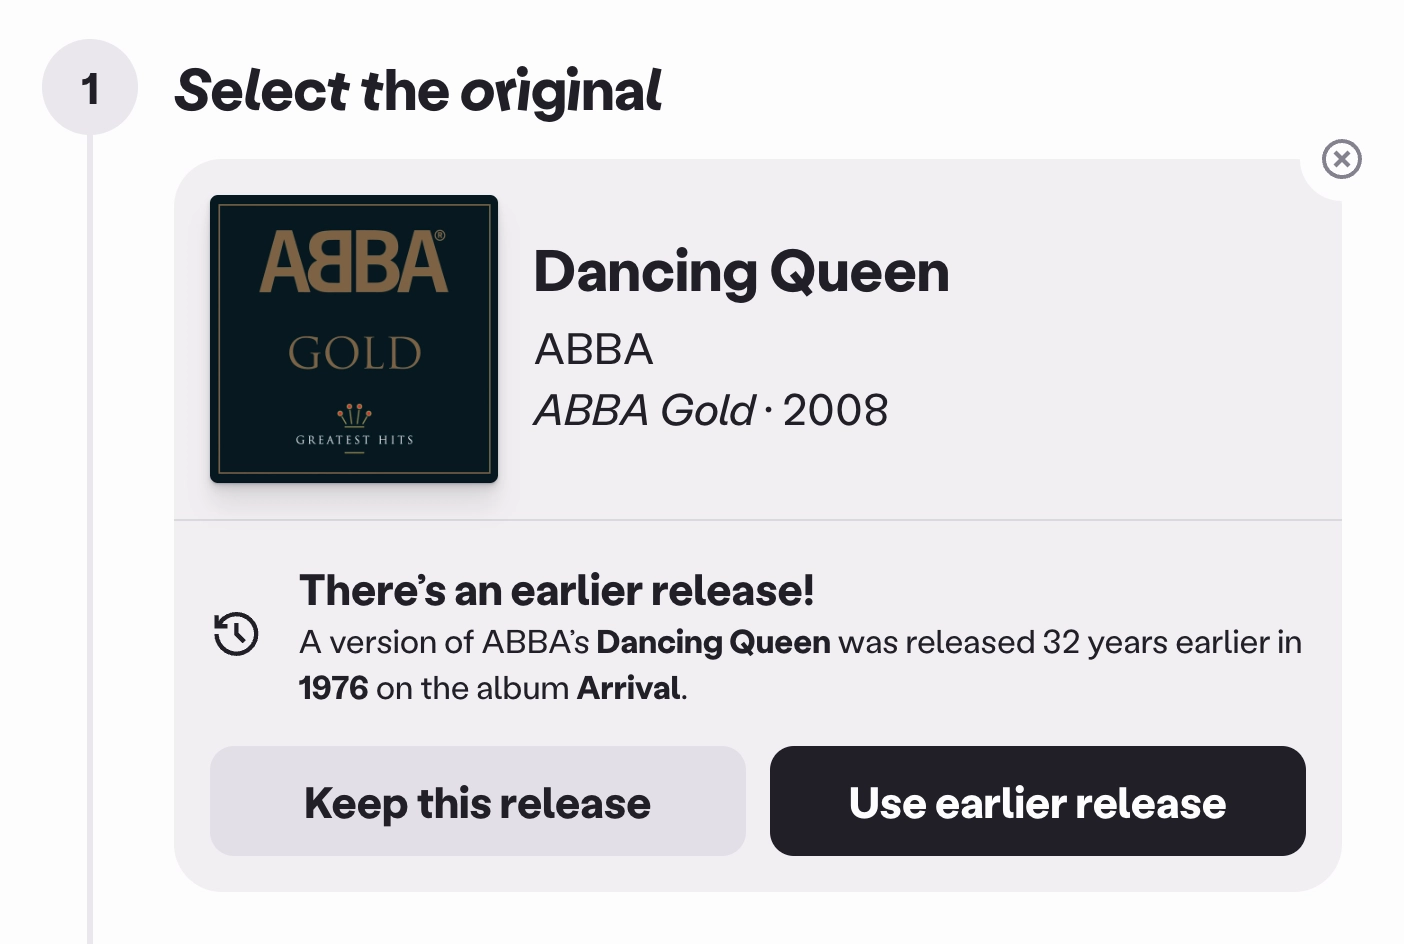 The user has selected ABBA's Dancing Queen from ABBA Gold. A banner says
there's an earlier release, and prompts the user to choose the album
Arrival, which was released 32 years
earlier.